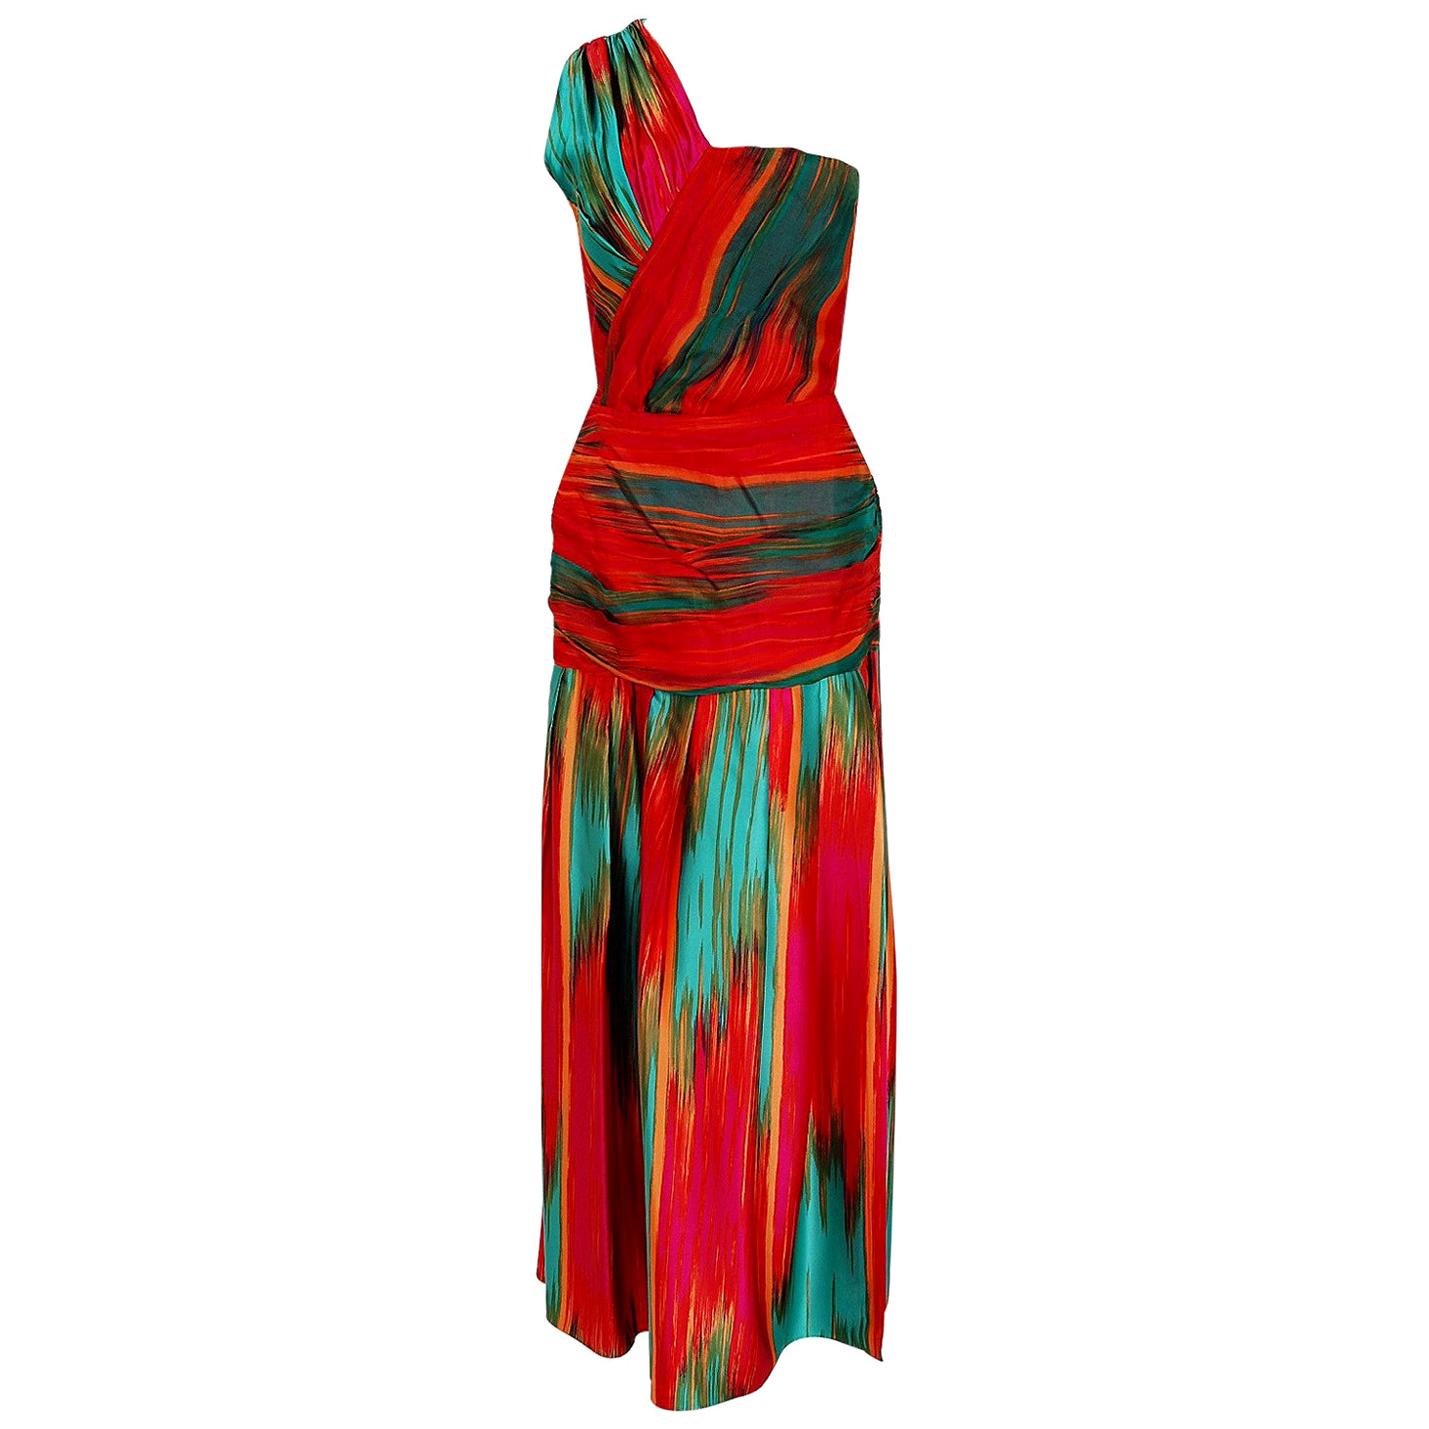 1975 Lillie Rubin Colorful Abstract Print Silk One-Shoulder Grecian Dress Set